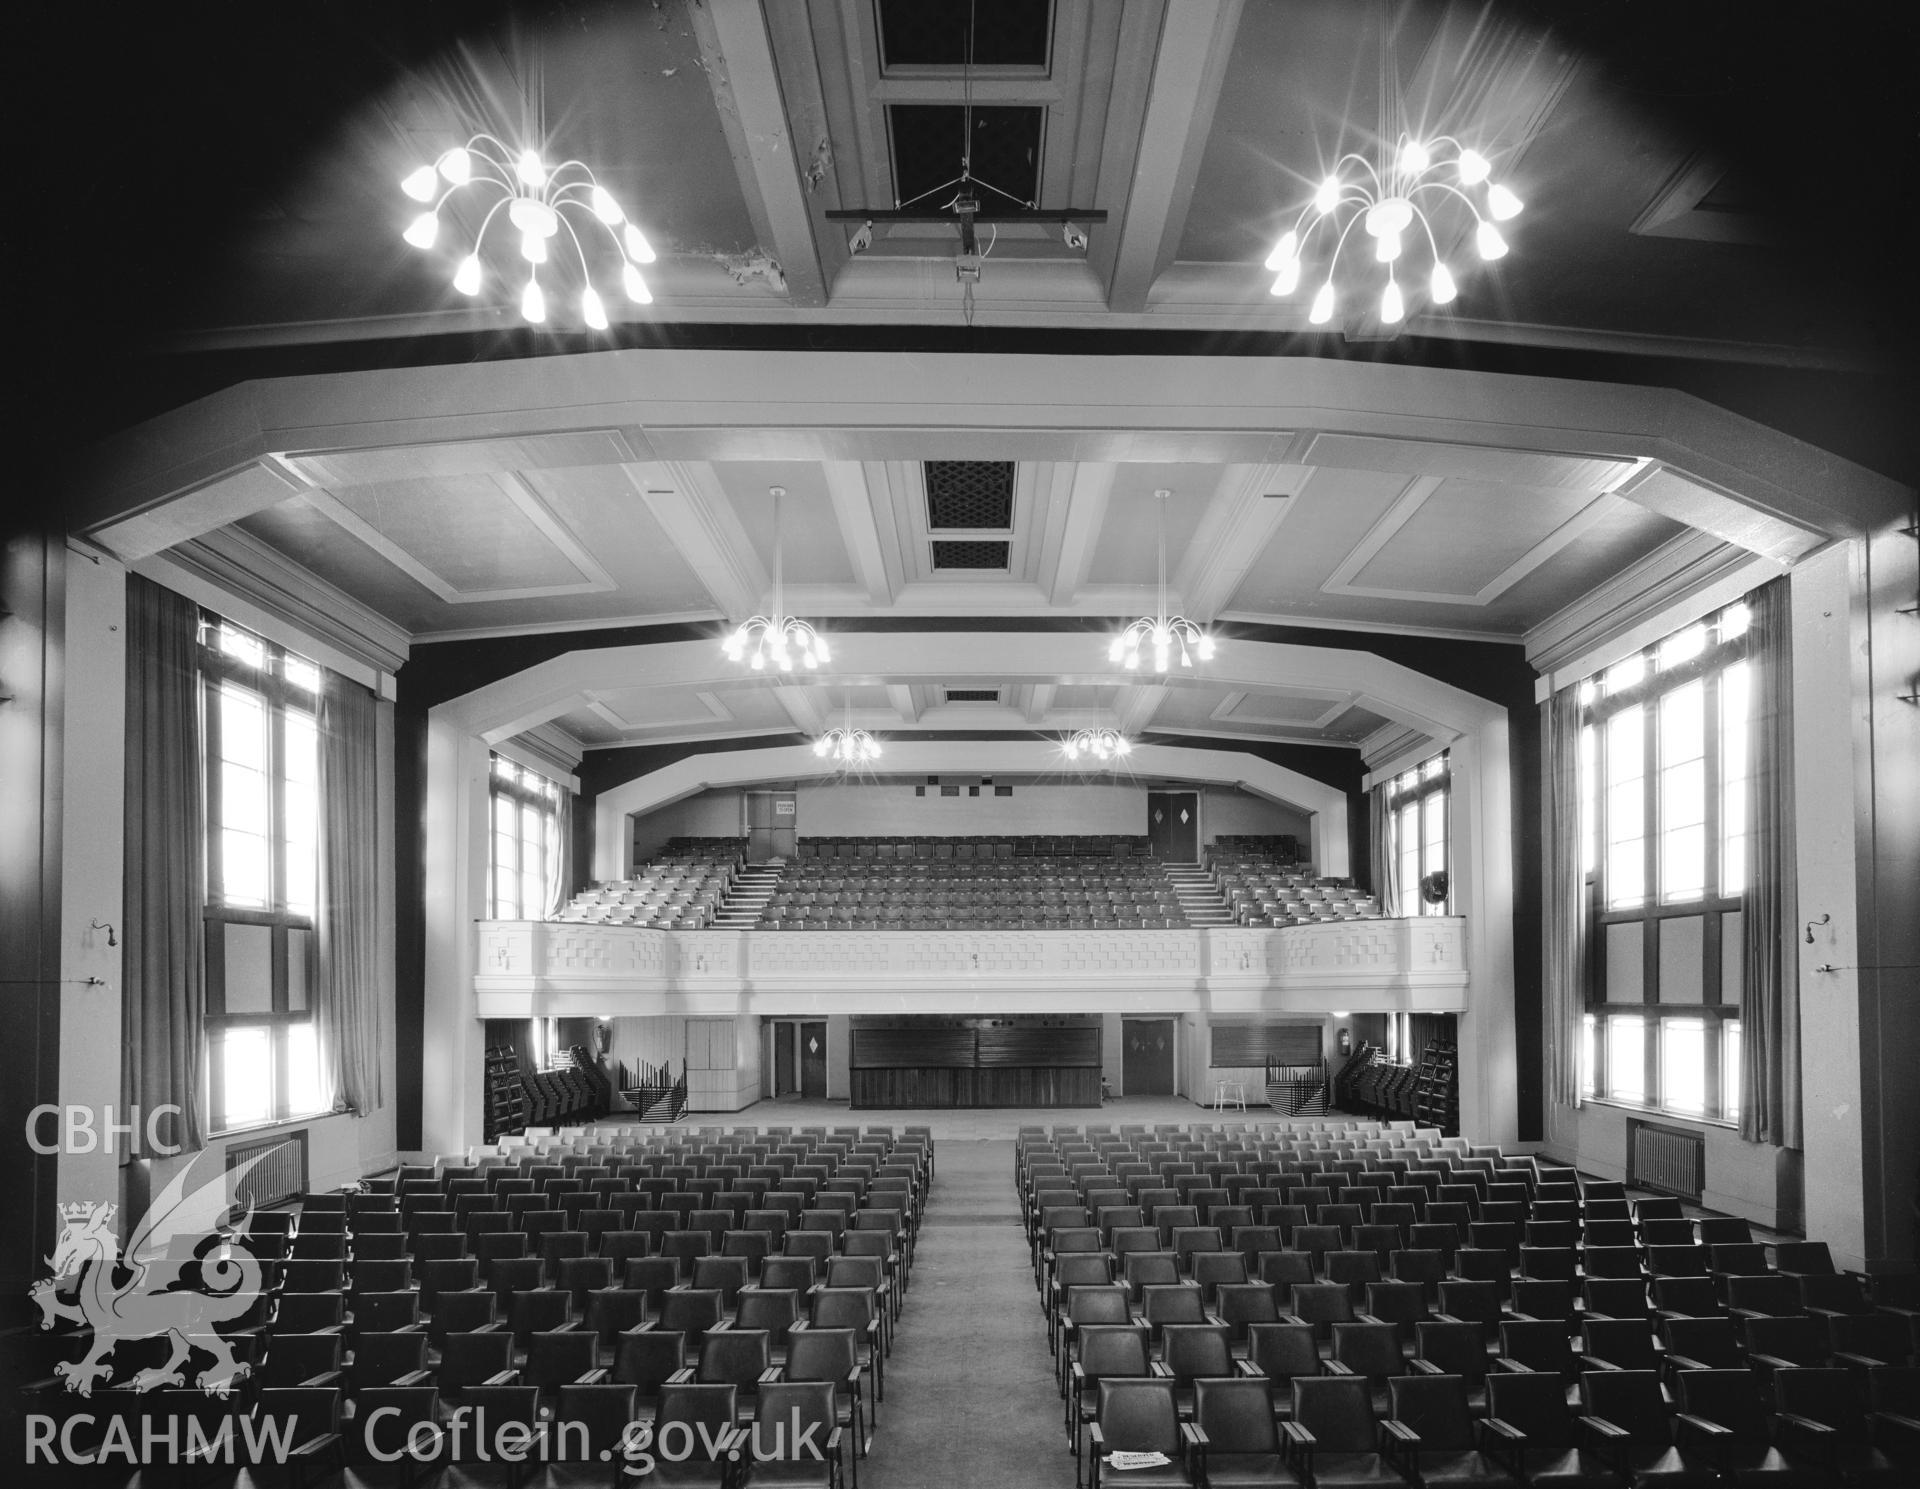 Auditorium from stage